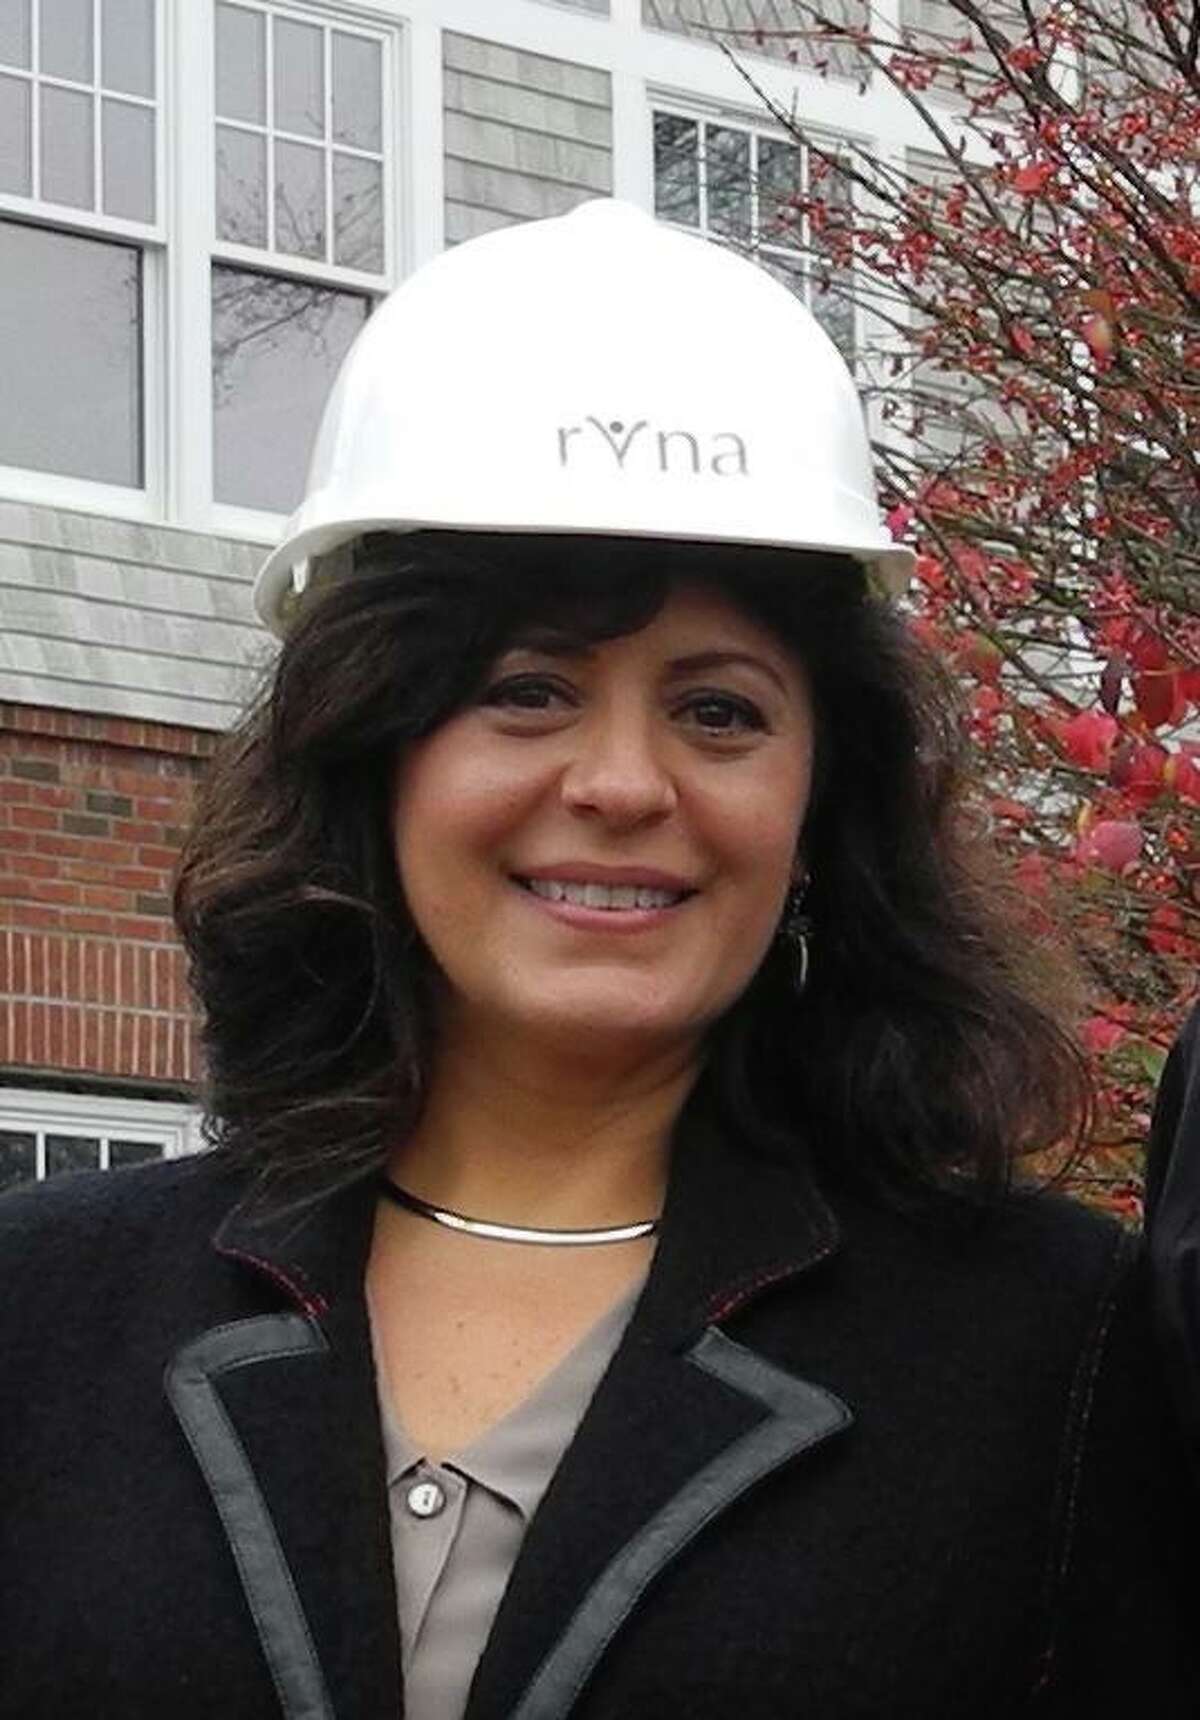 Theresa Santoro leads the RVNA, which serves 28 Connecticut towns. She donned a hard has in 2015 when giving a tour of group's headquarters, then still under-construction in Ridgefield.